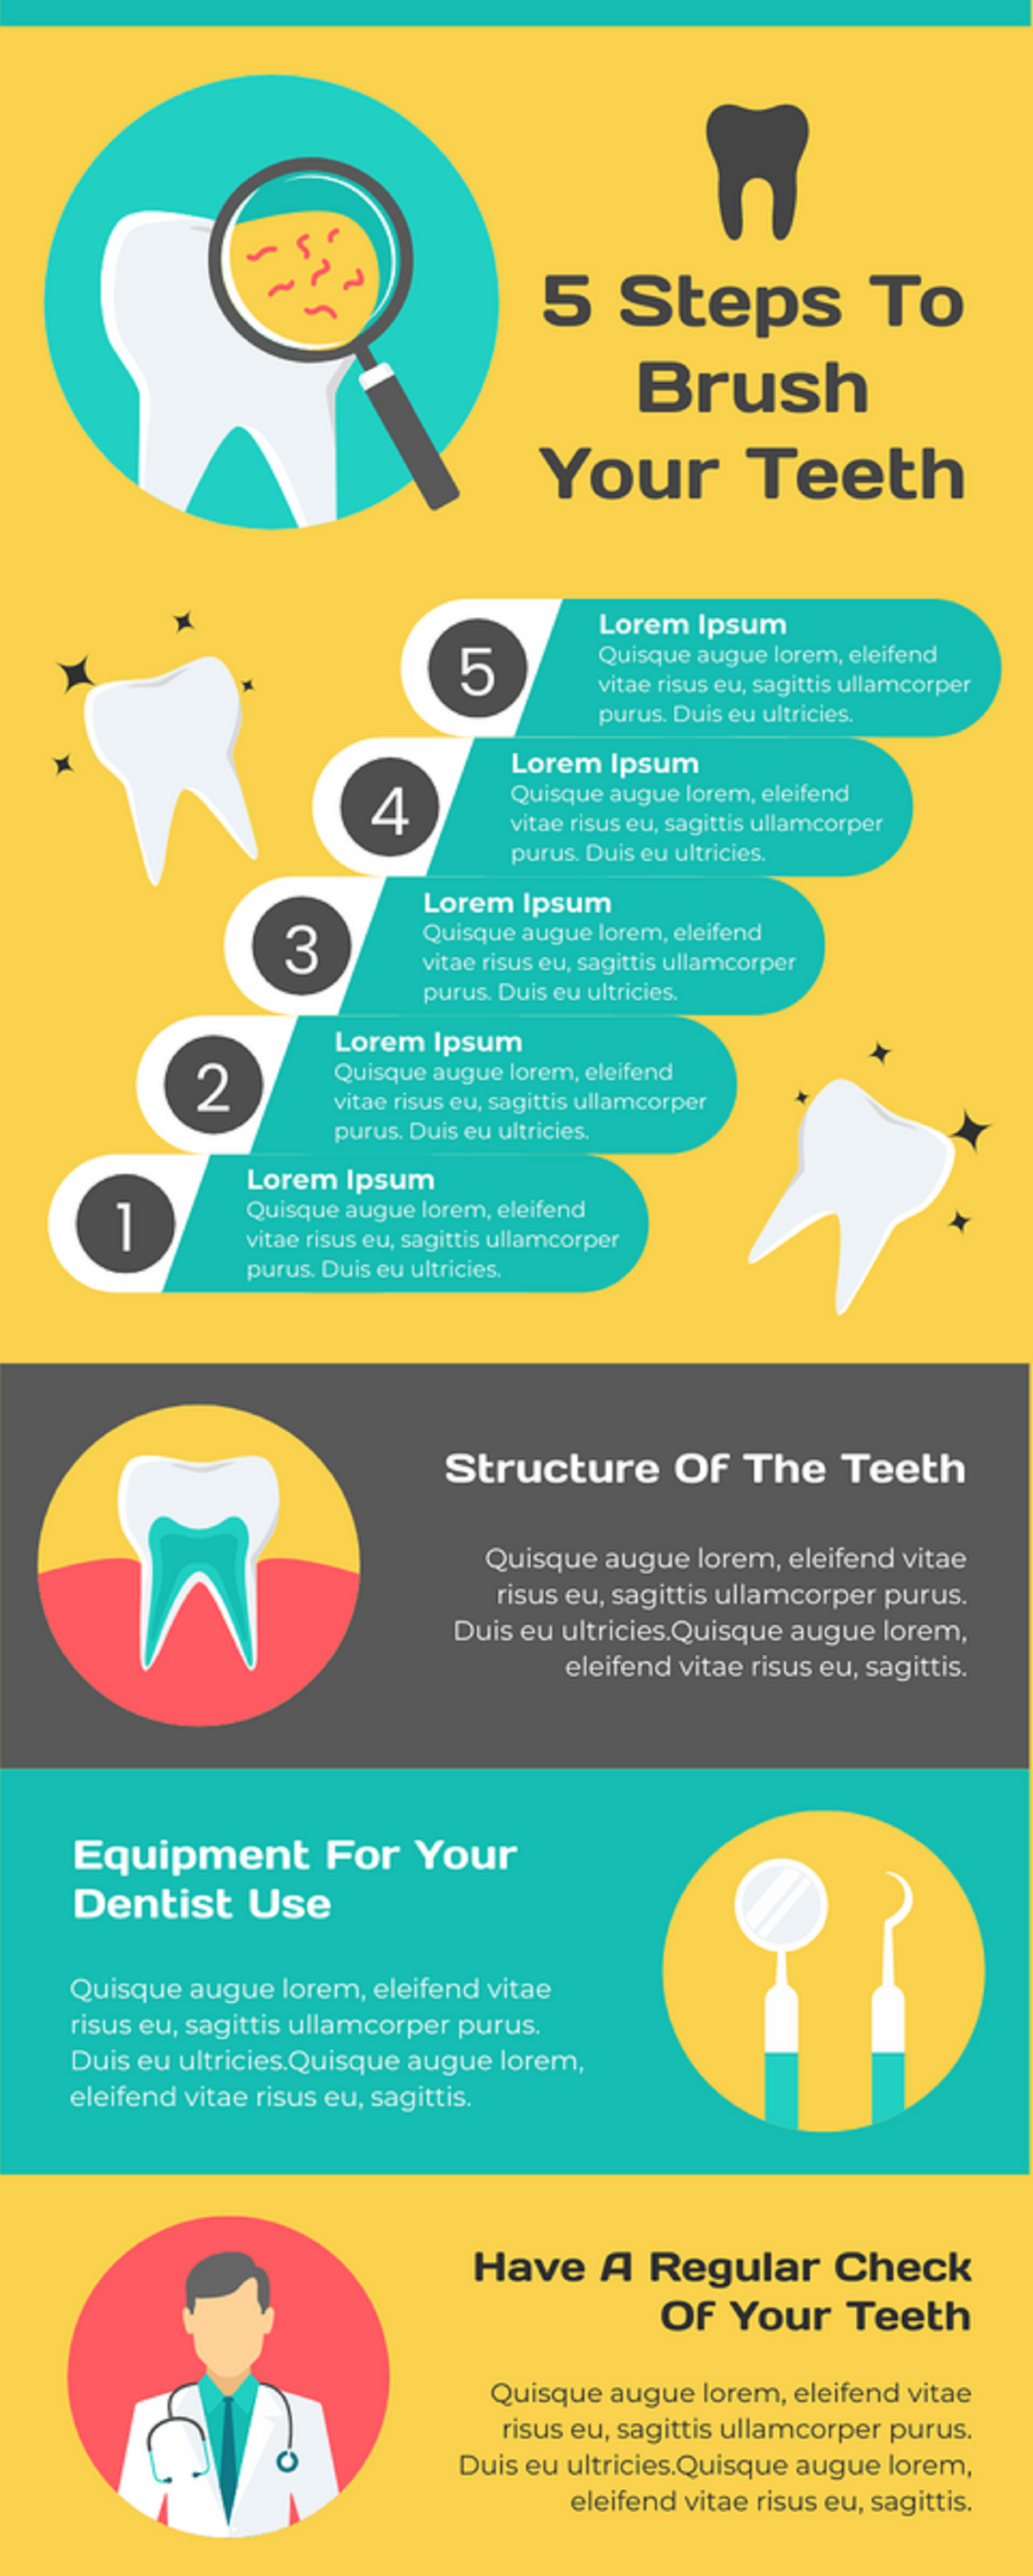 5 Steps To Brush Your Teeth #infographic